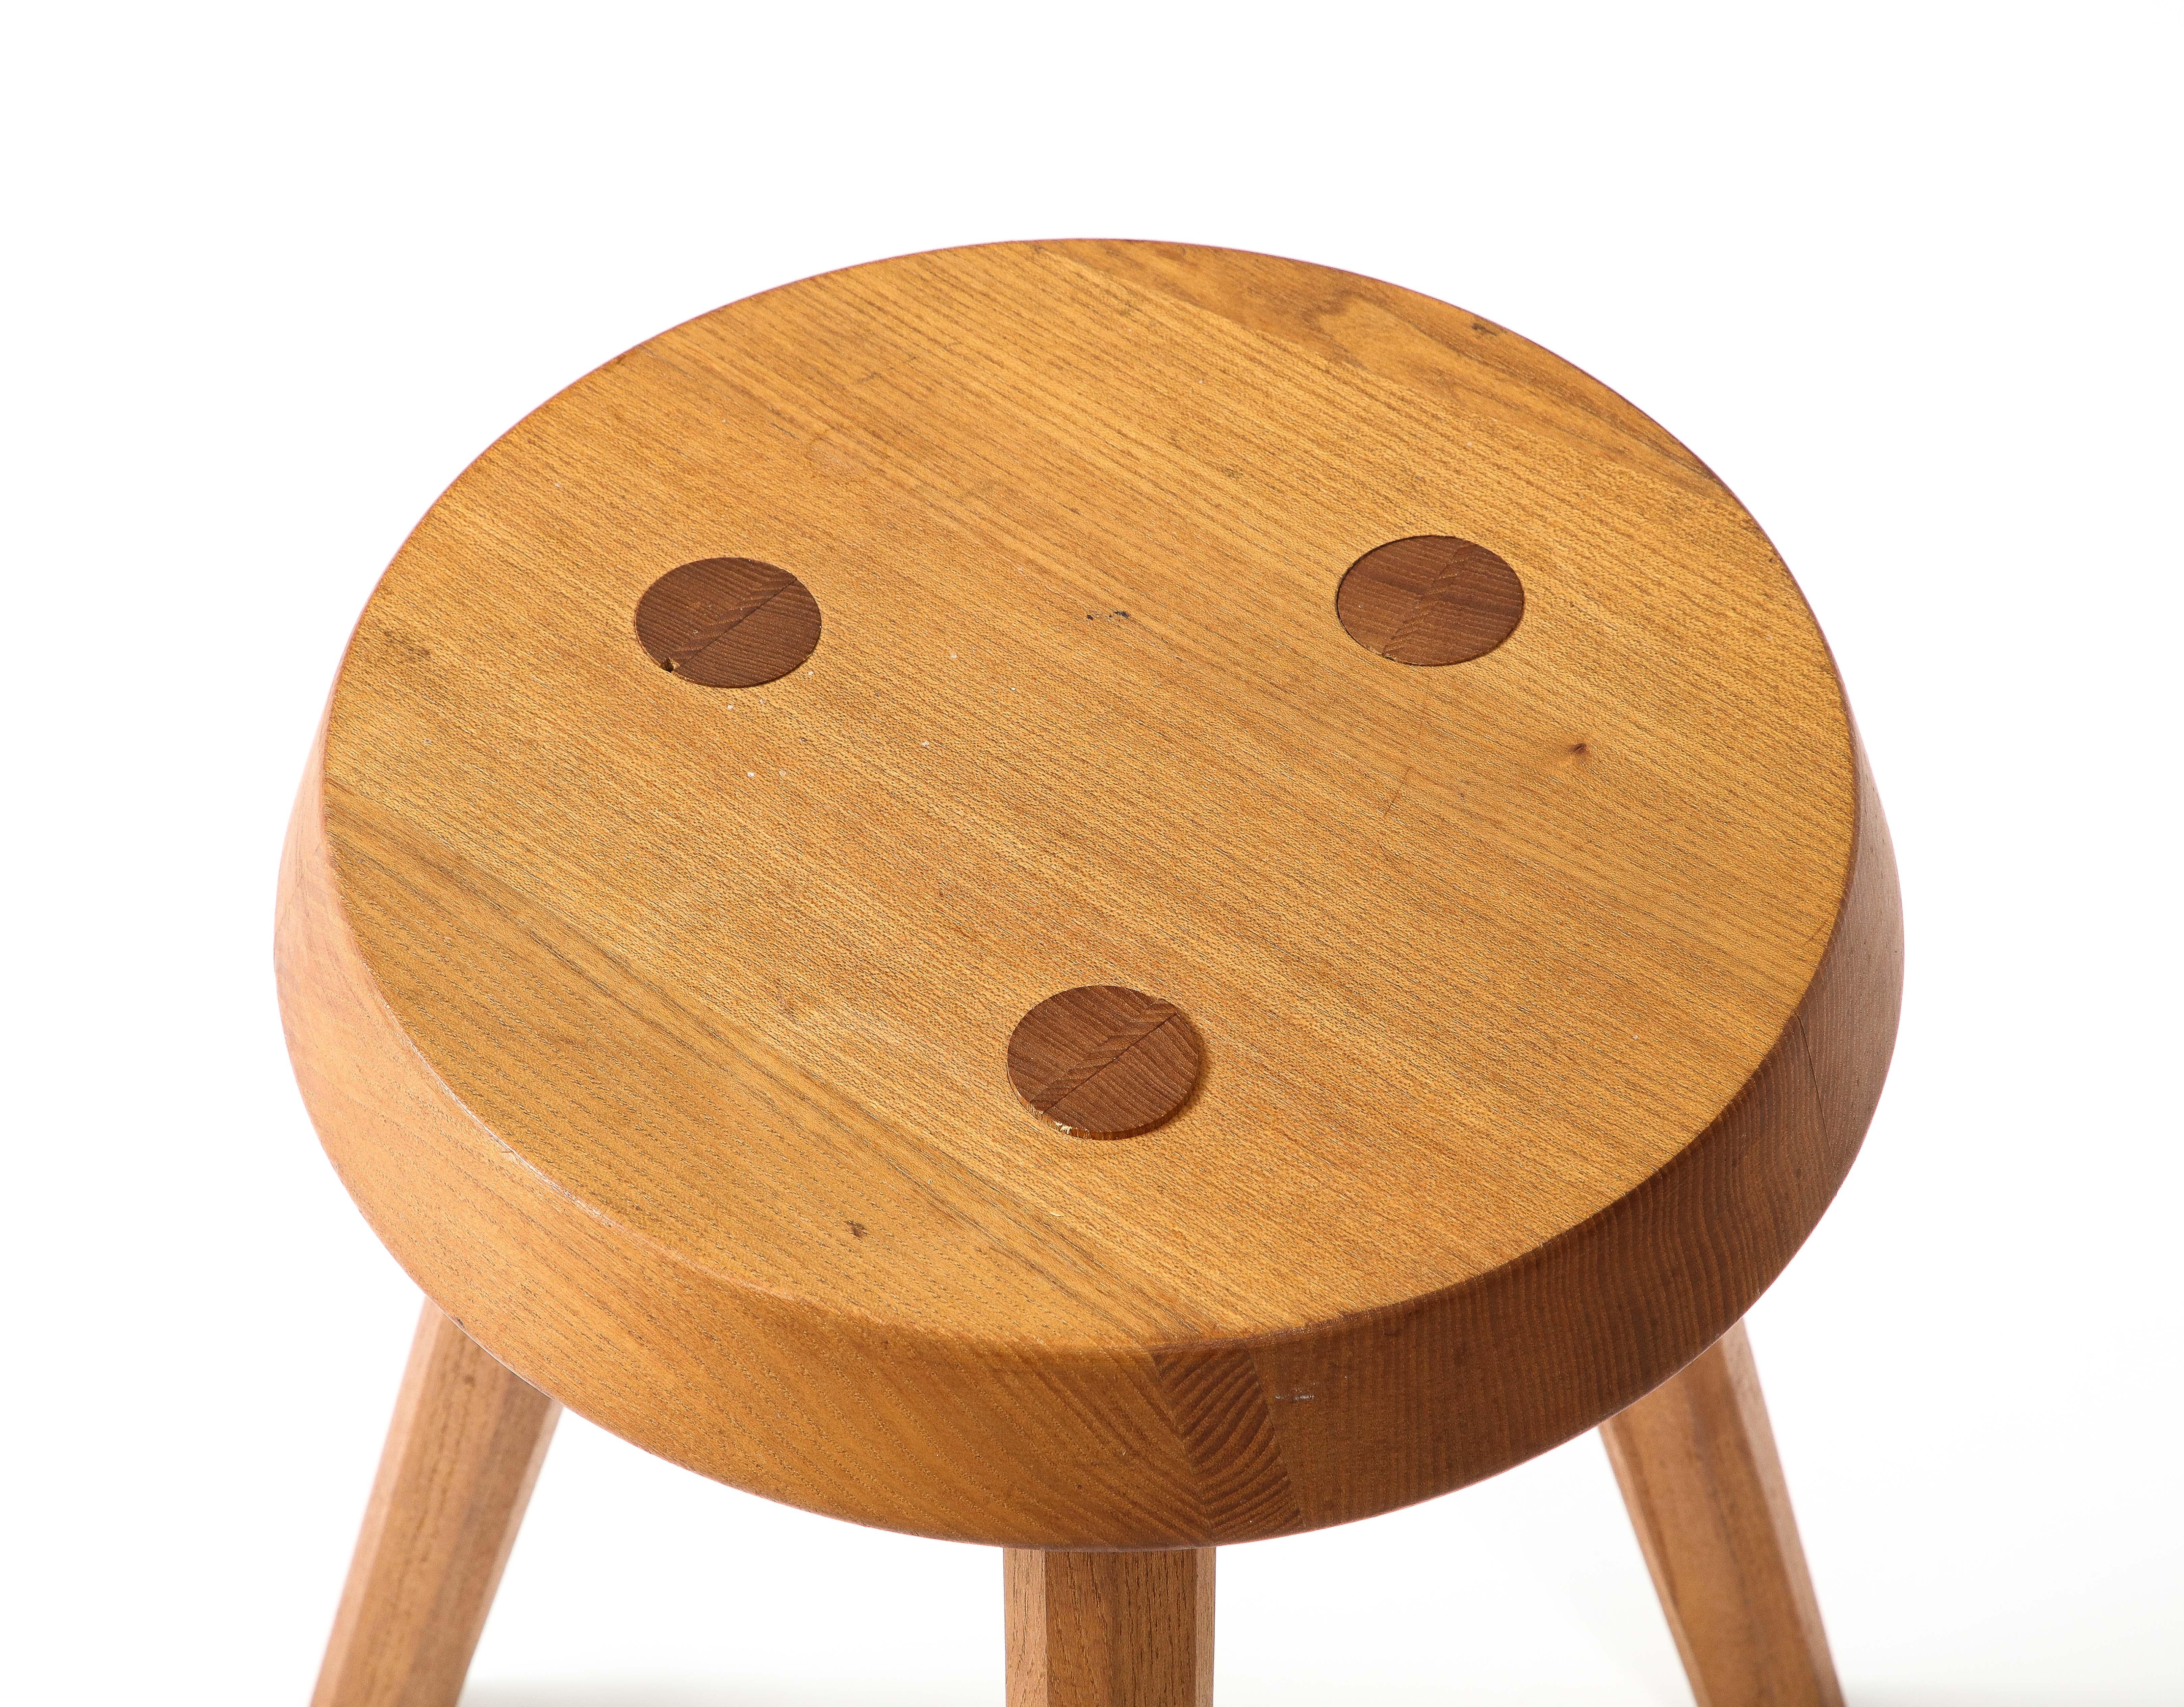 Oak tripod stool with visible dowels.
